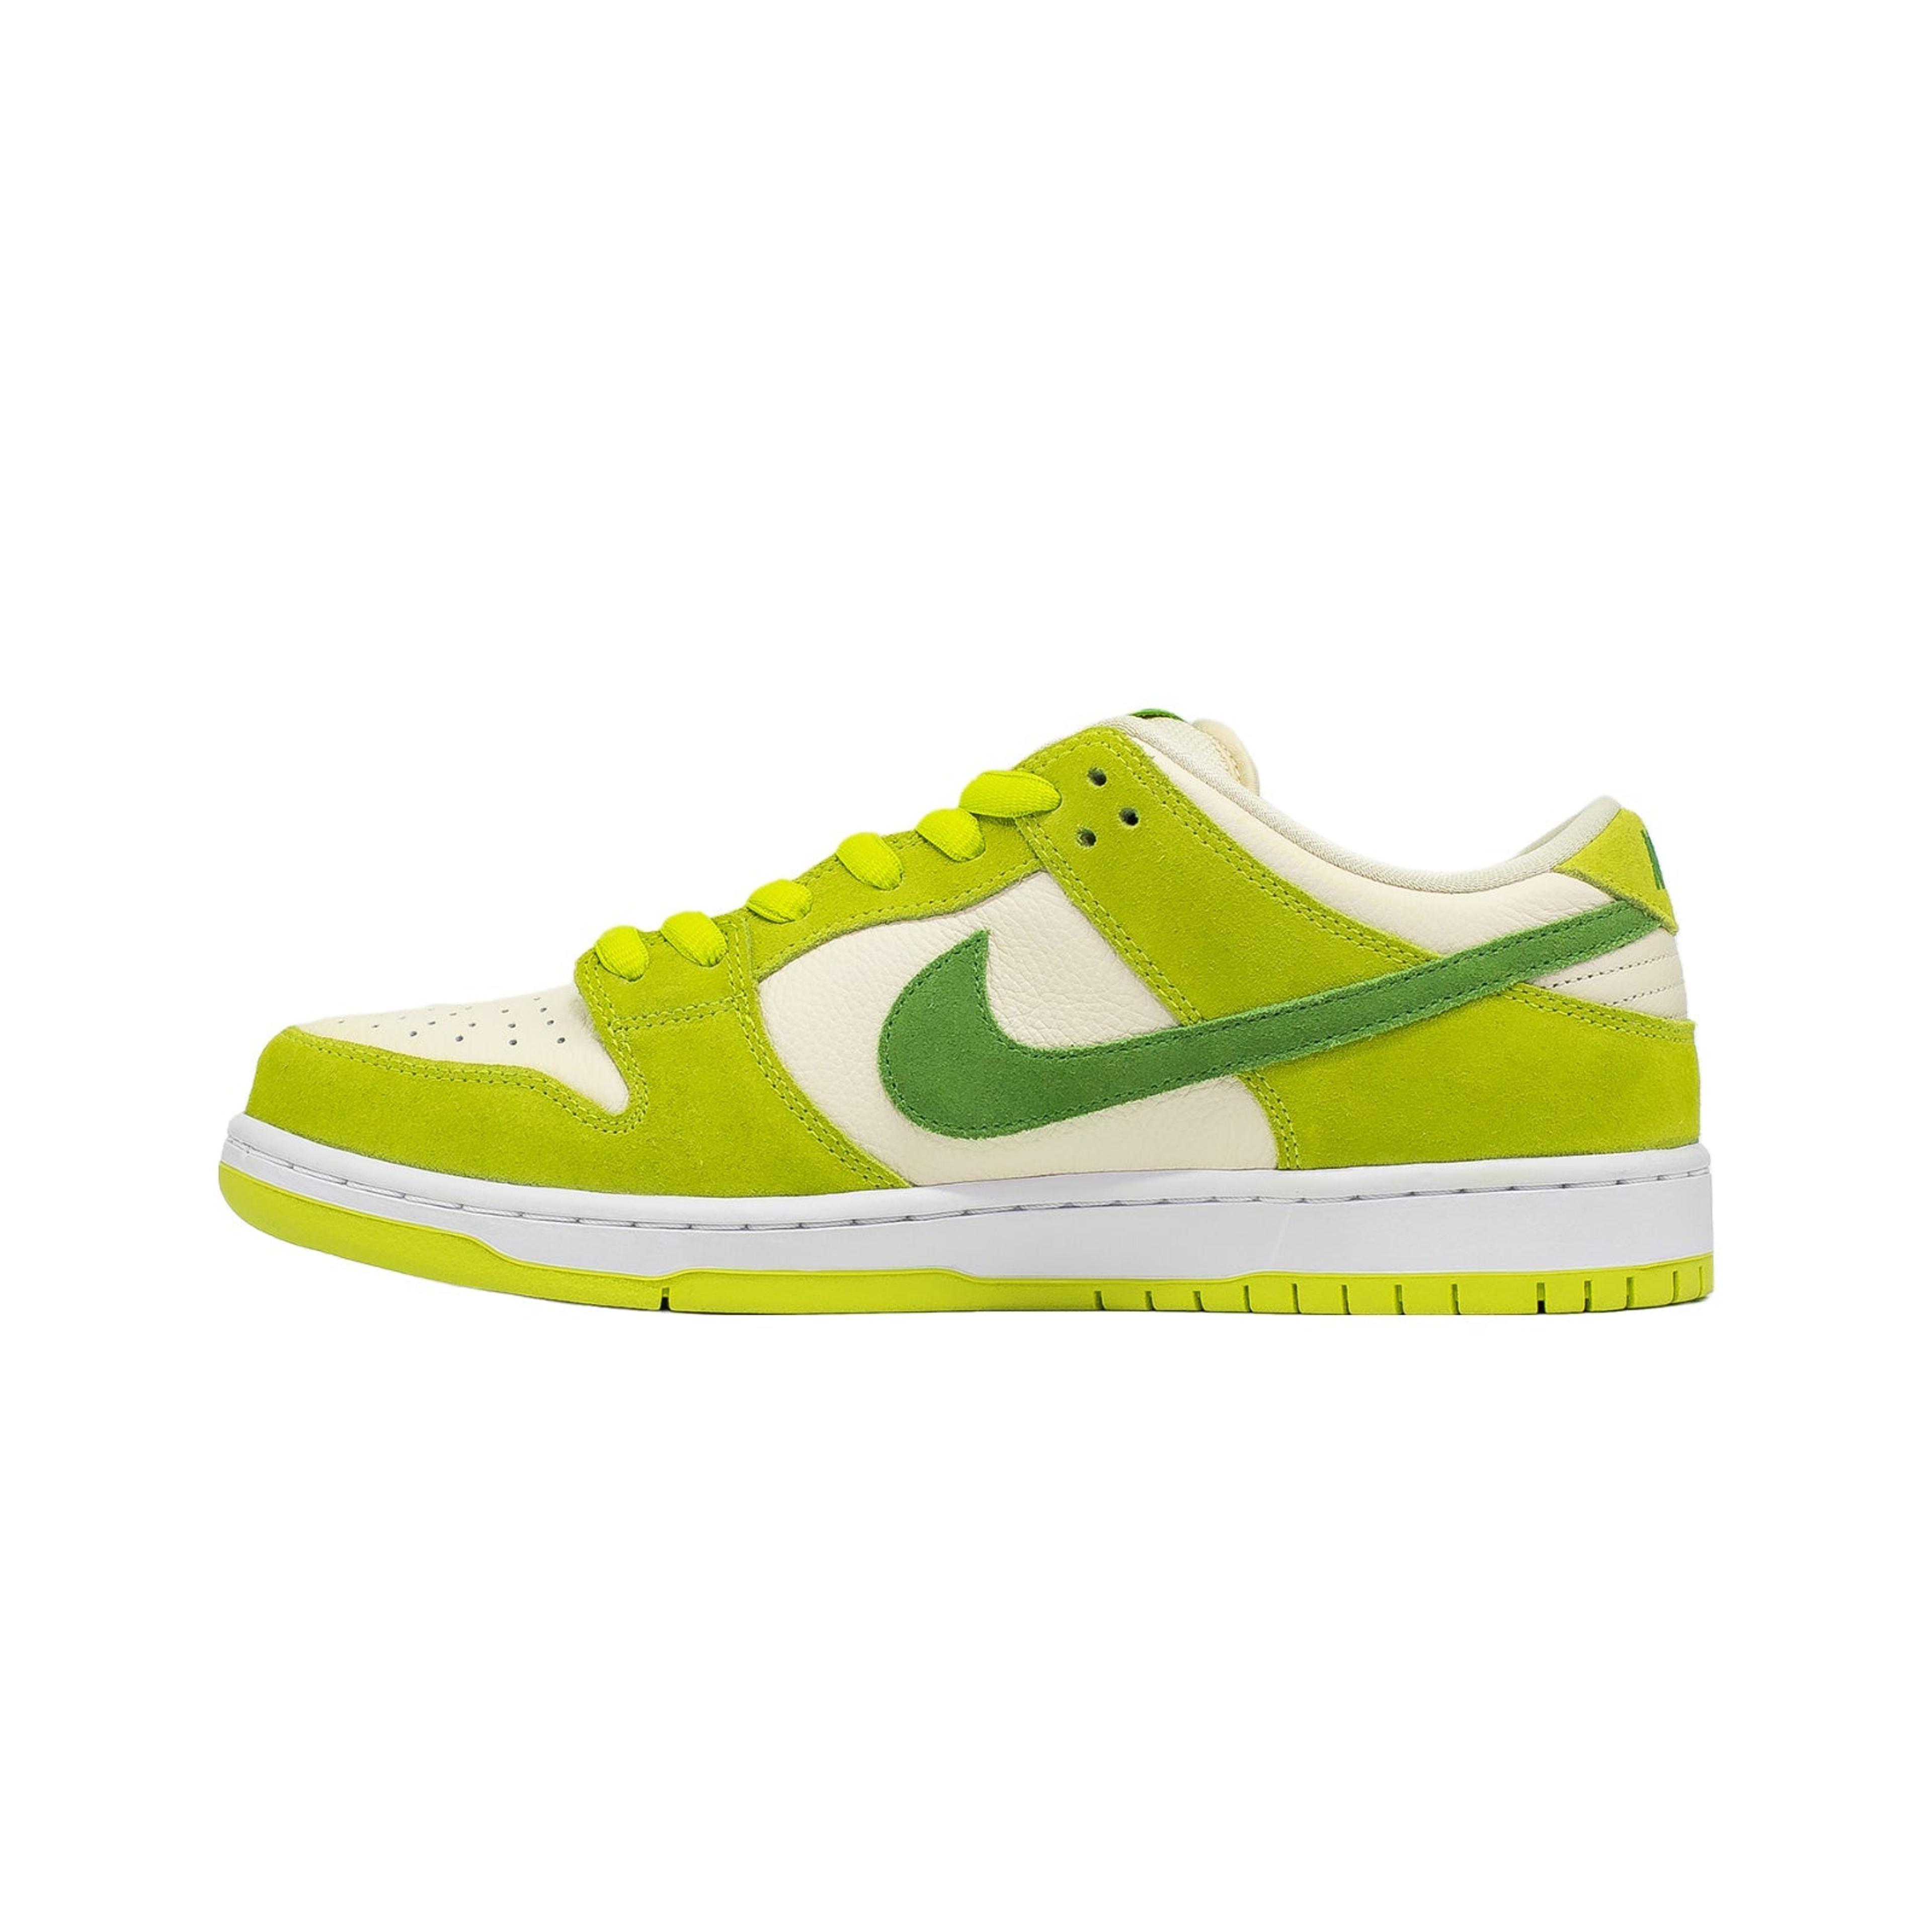 Alternate View 1 of Nike SB Dunk Low, Fruity Pack - Green Apple